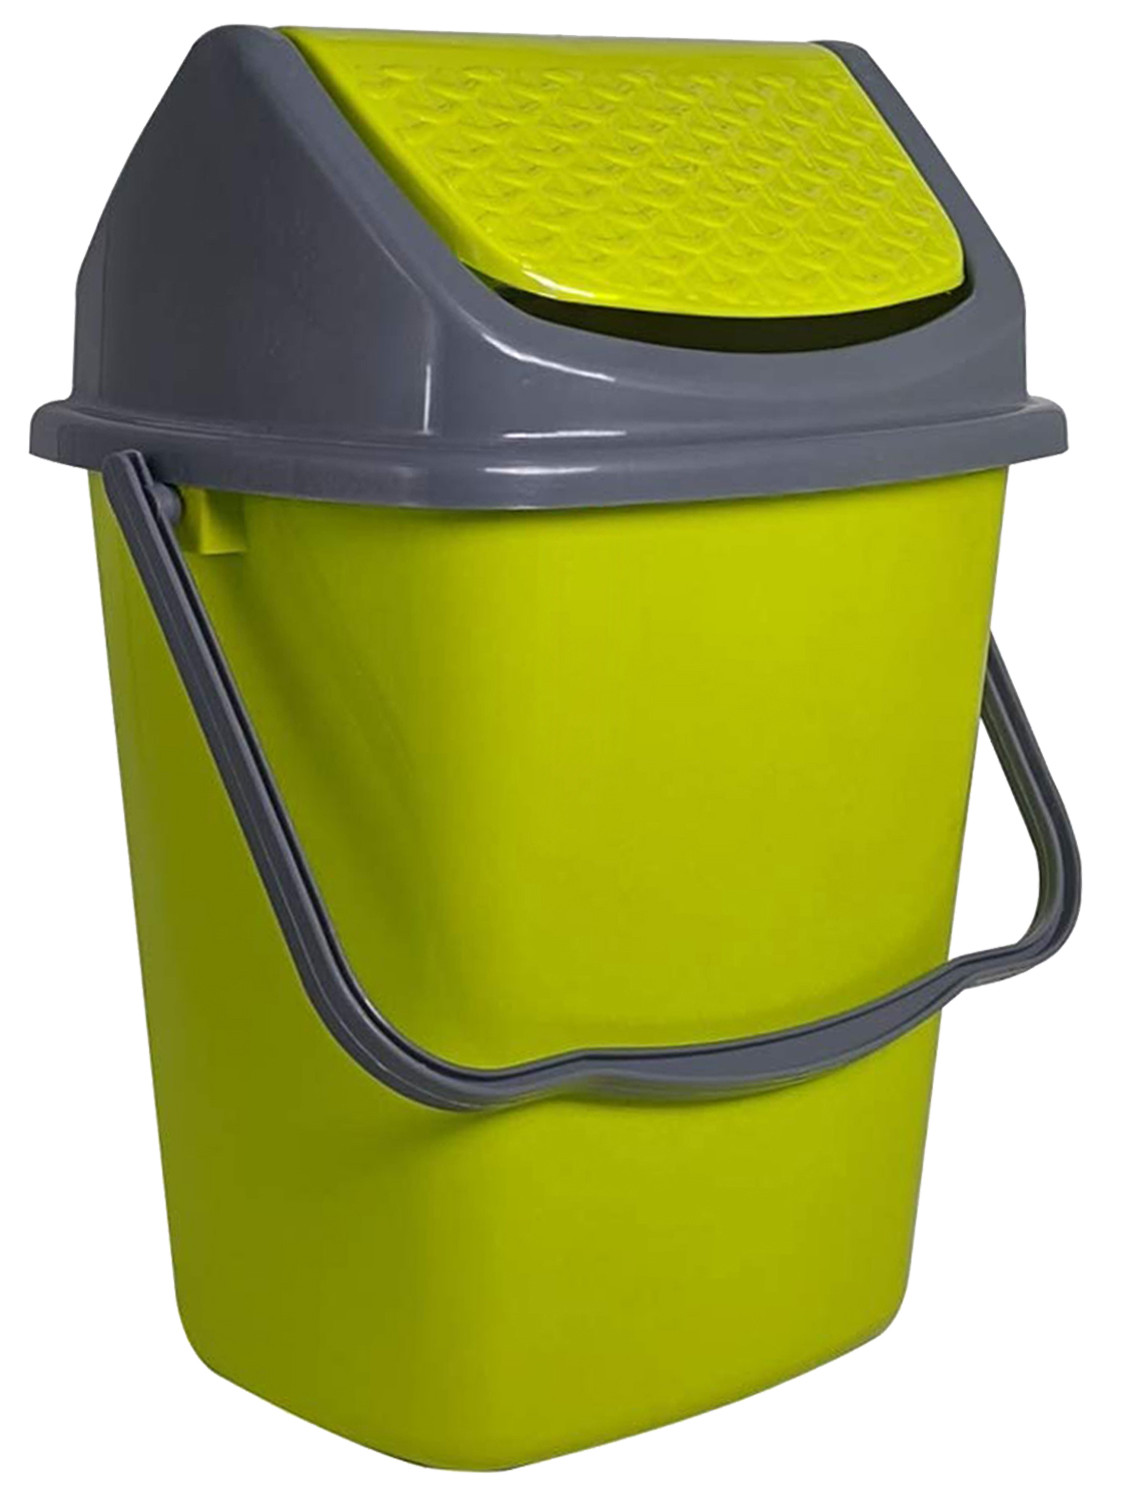 Kuber Industries Delight Plastic Swing  Garbage Waste Dustbin for Home, Office with Handle, 5 Liters (Green)